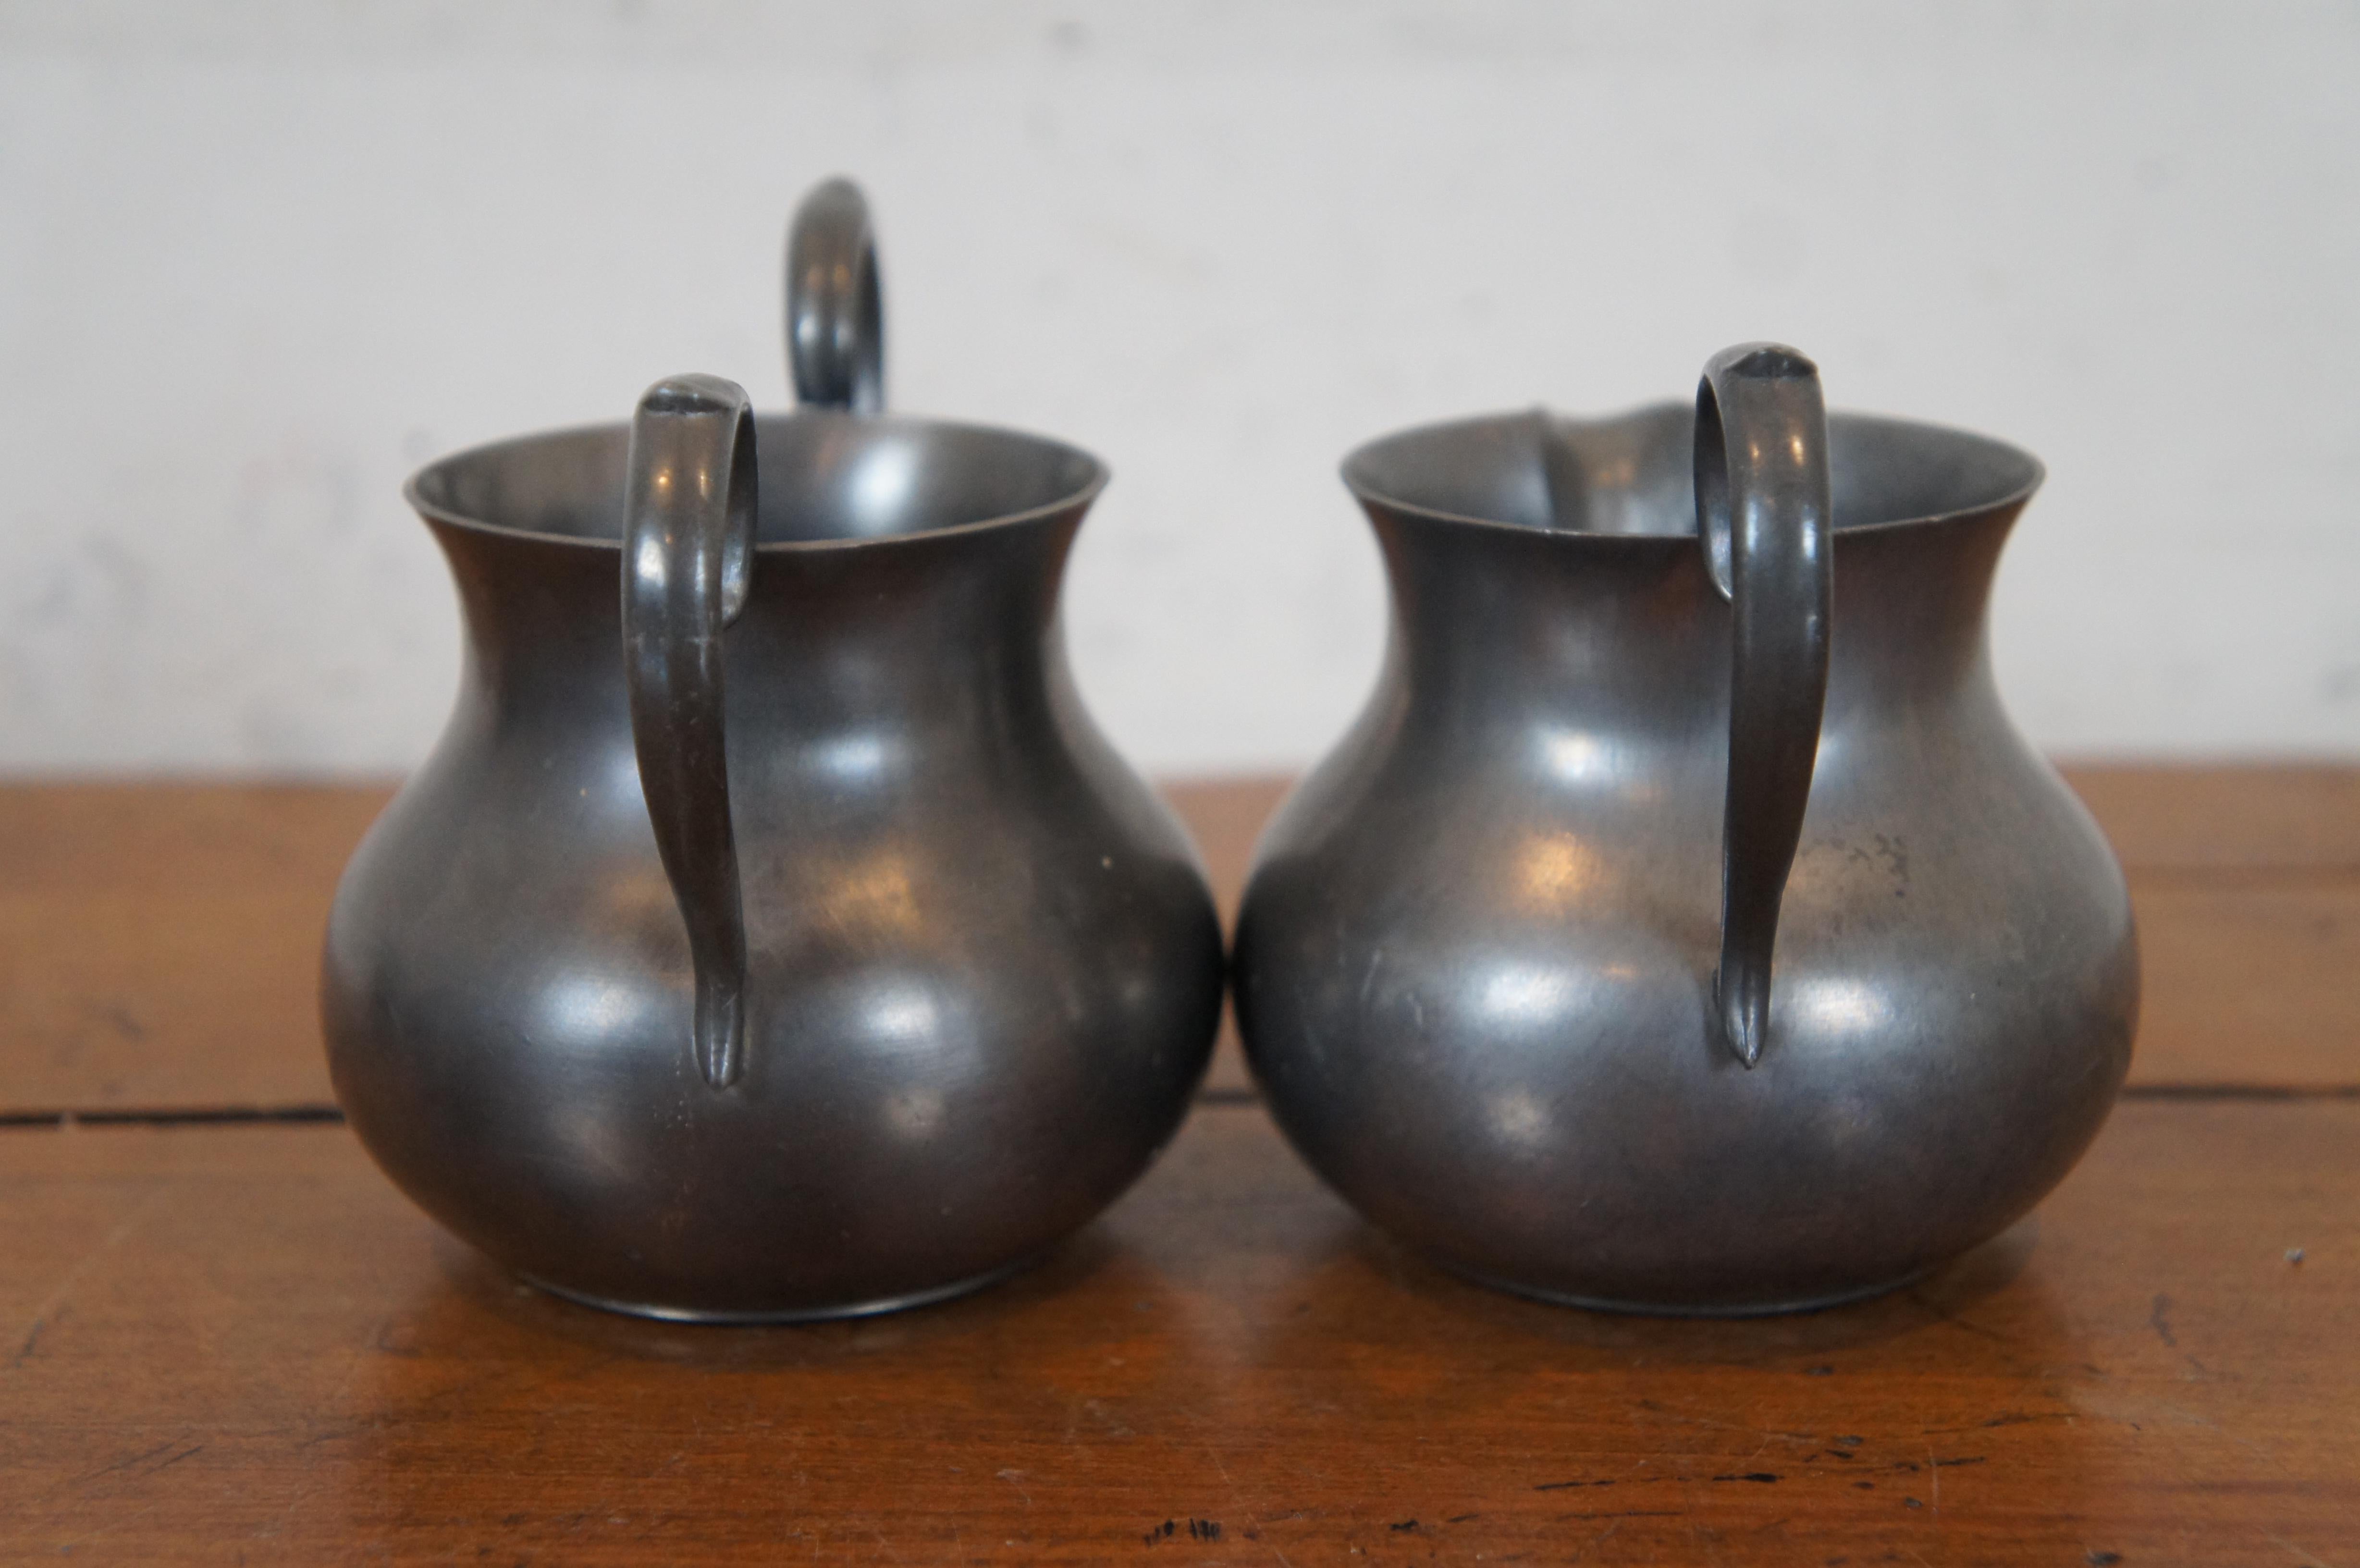 British Colonial Antique English Colonial Pewter Creamer Pitcher & Sugar Bowl Serving Set For Sale